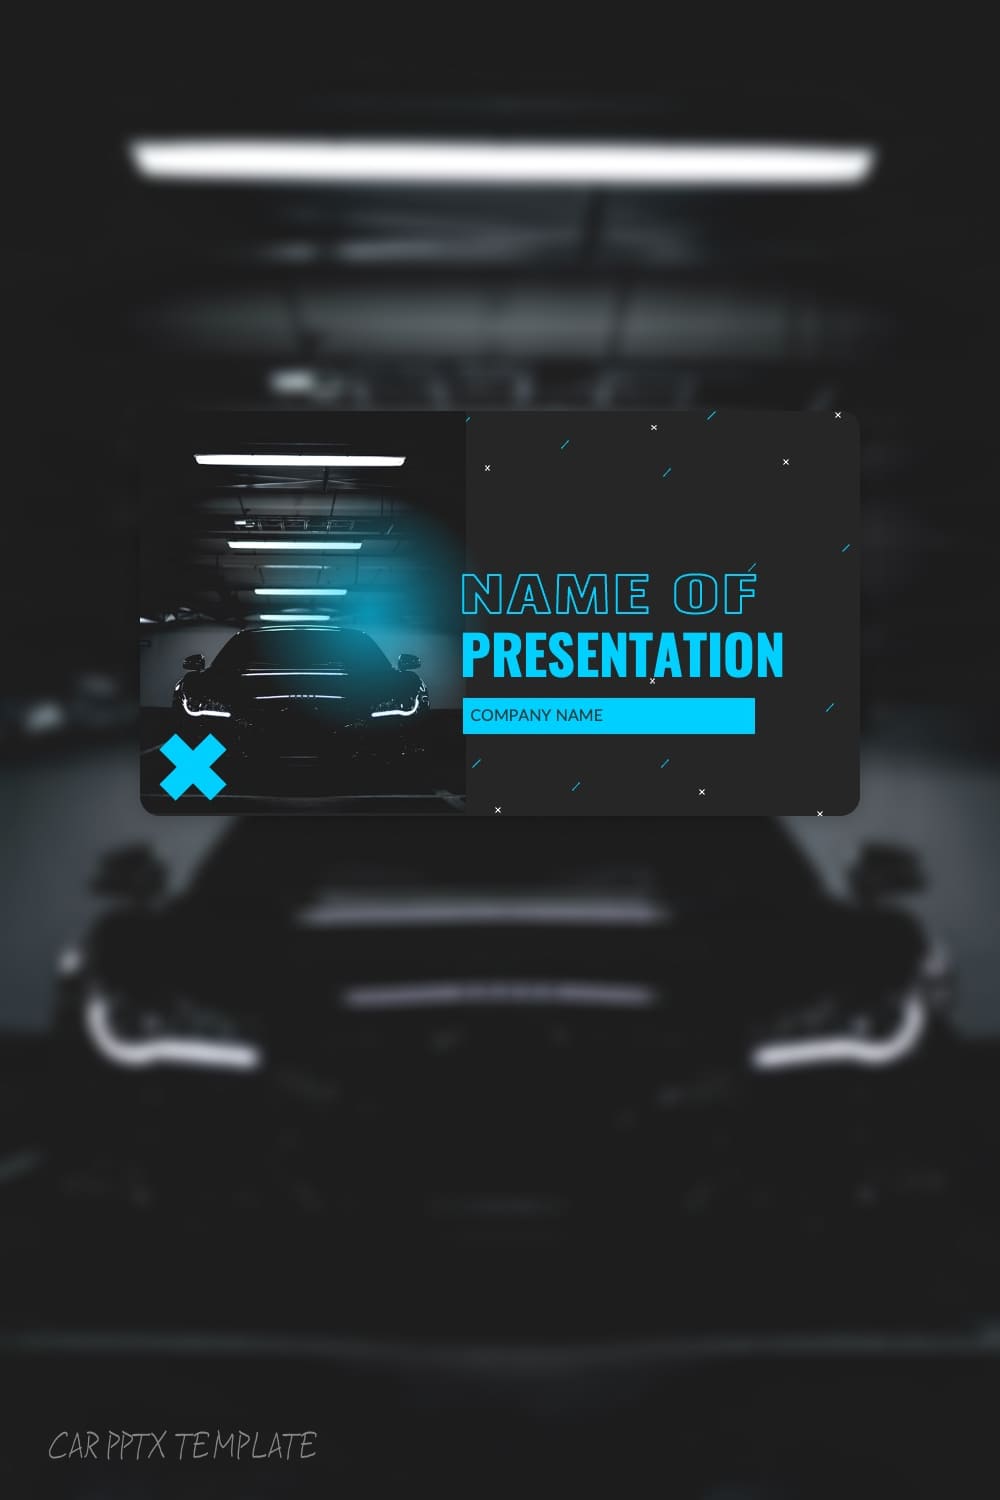 Car PPTX template - pinterest image preview.